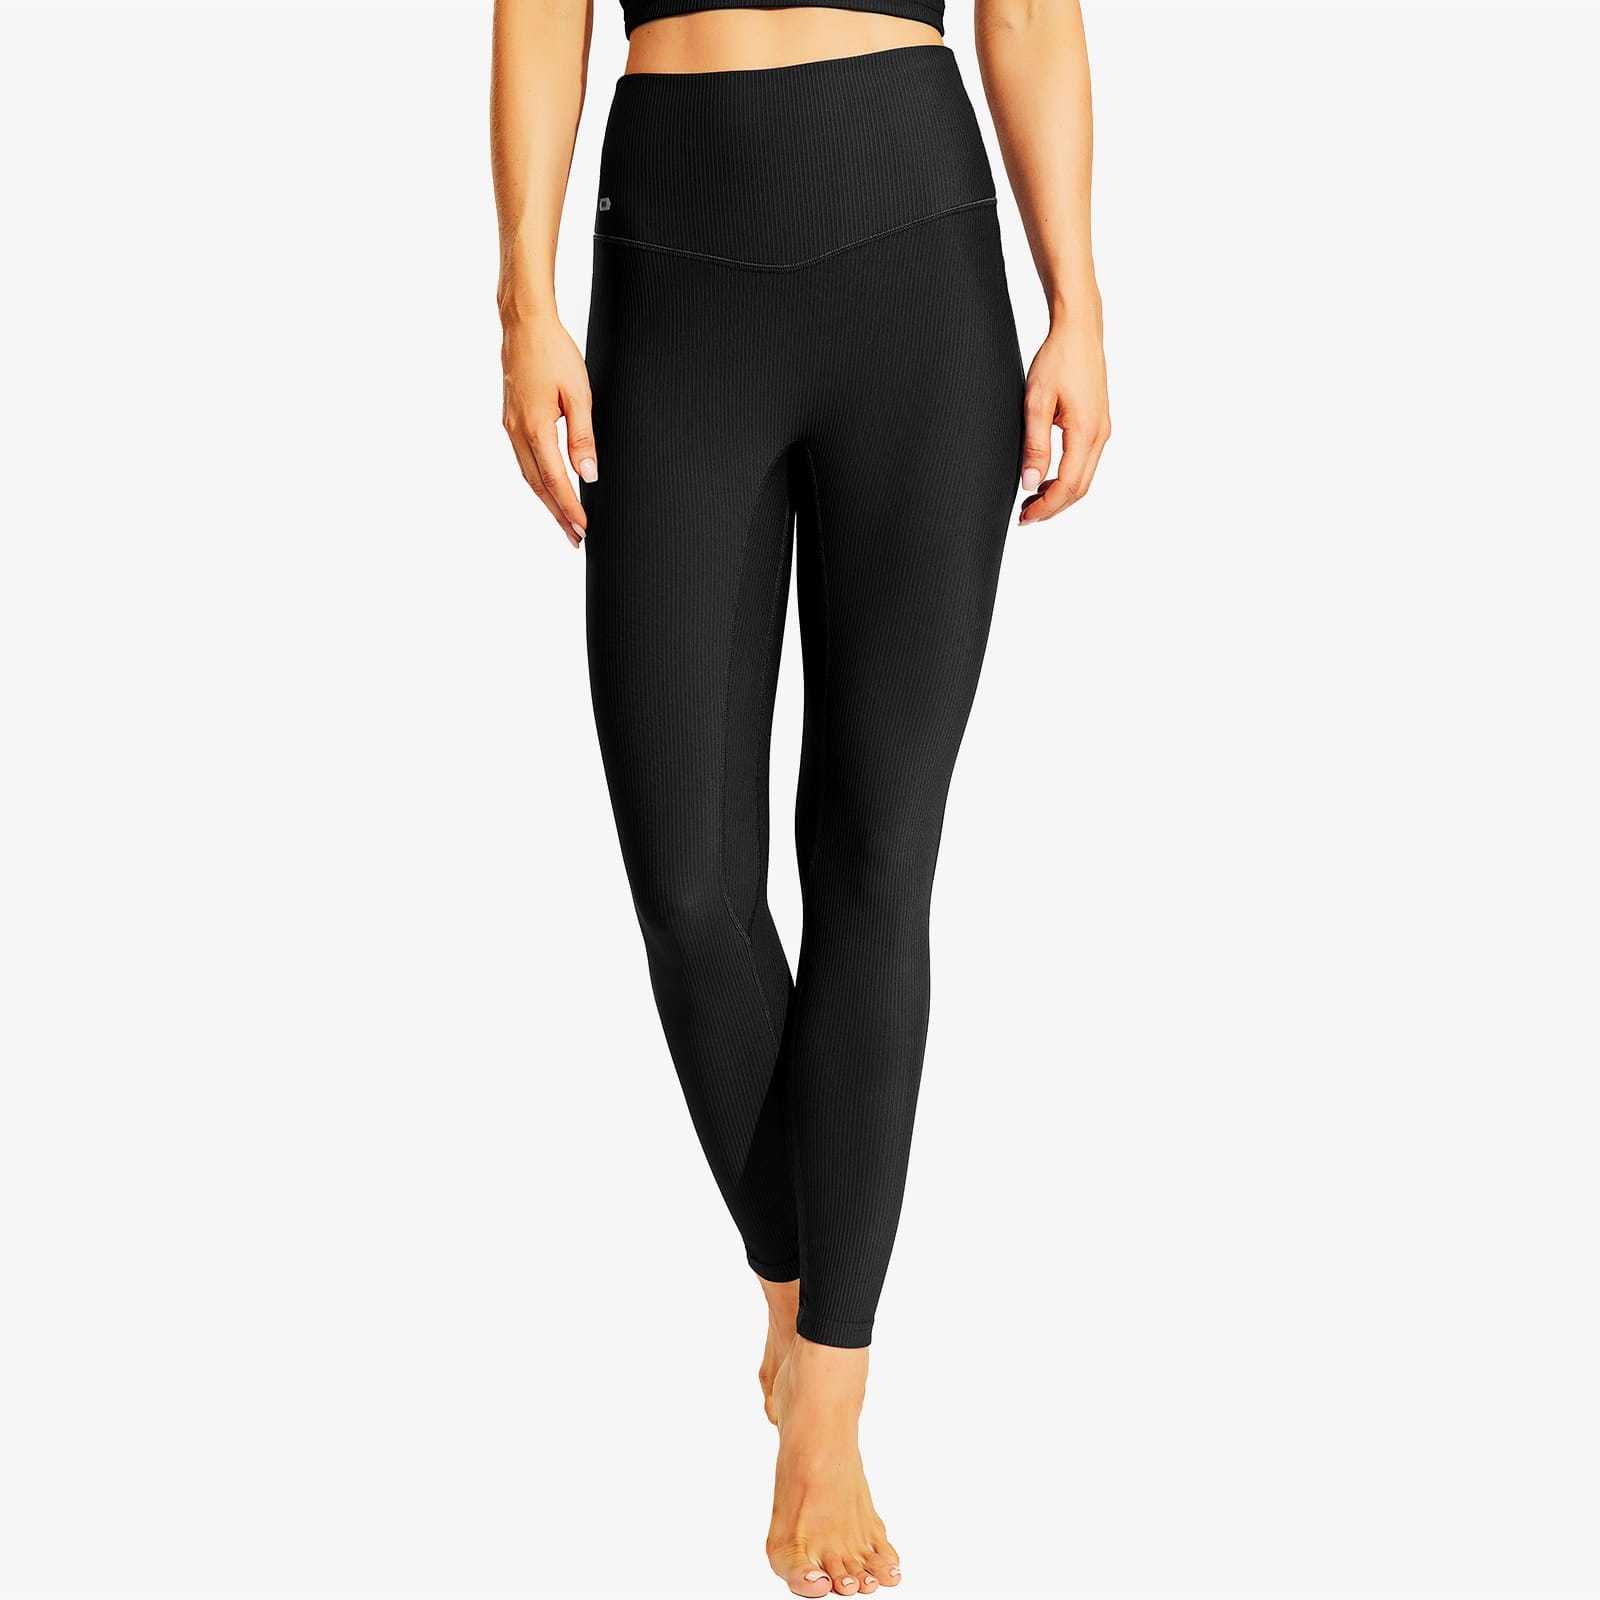 Women’s High Waisted Workout Leggings with Inside Pockets Women Yoga Pants MIER